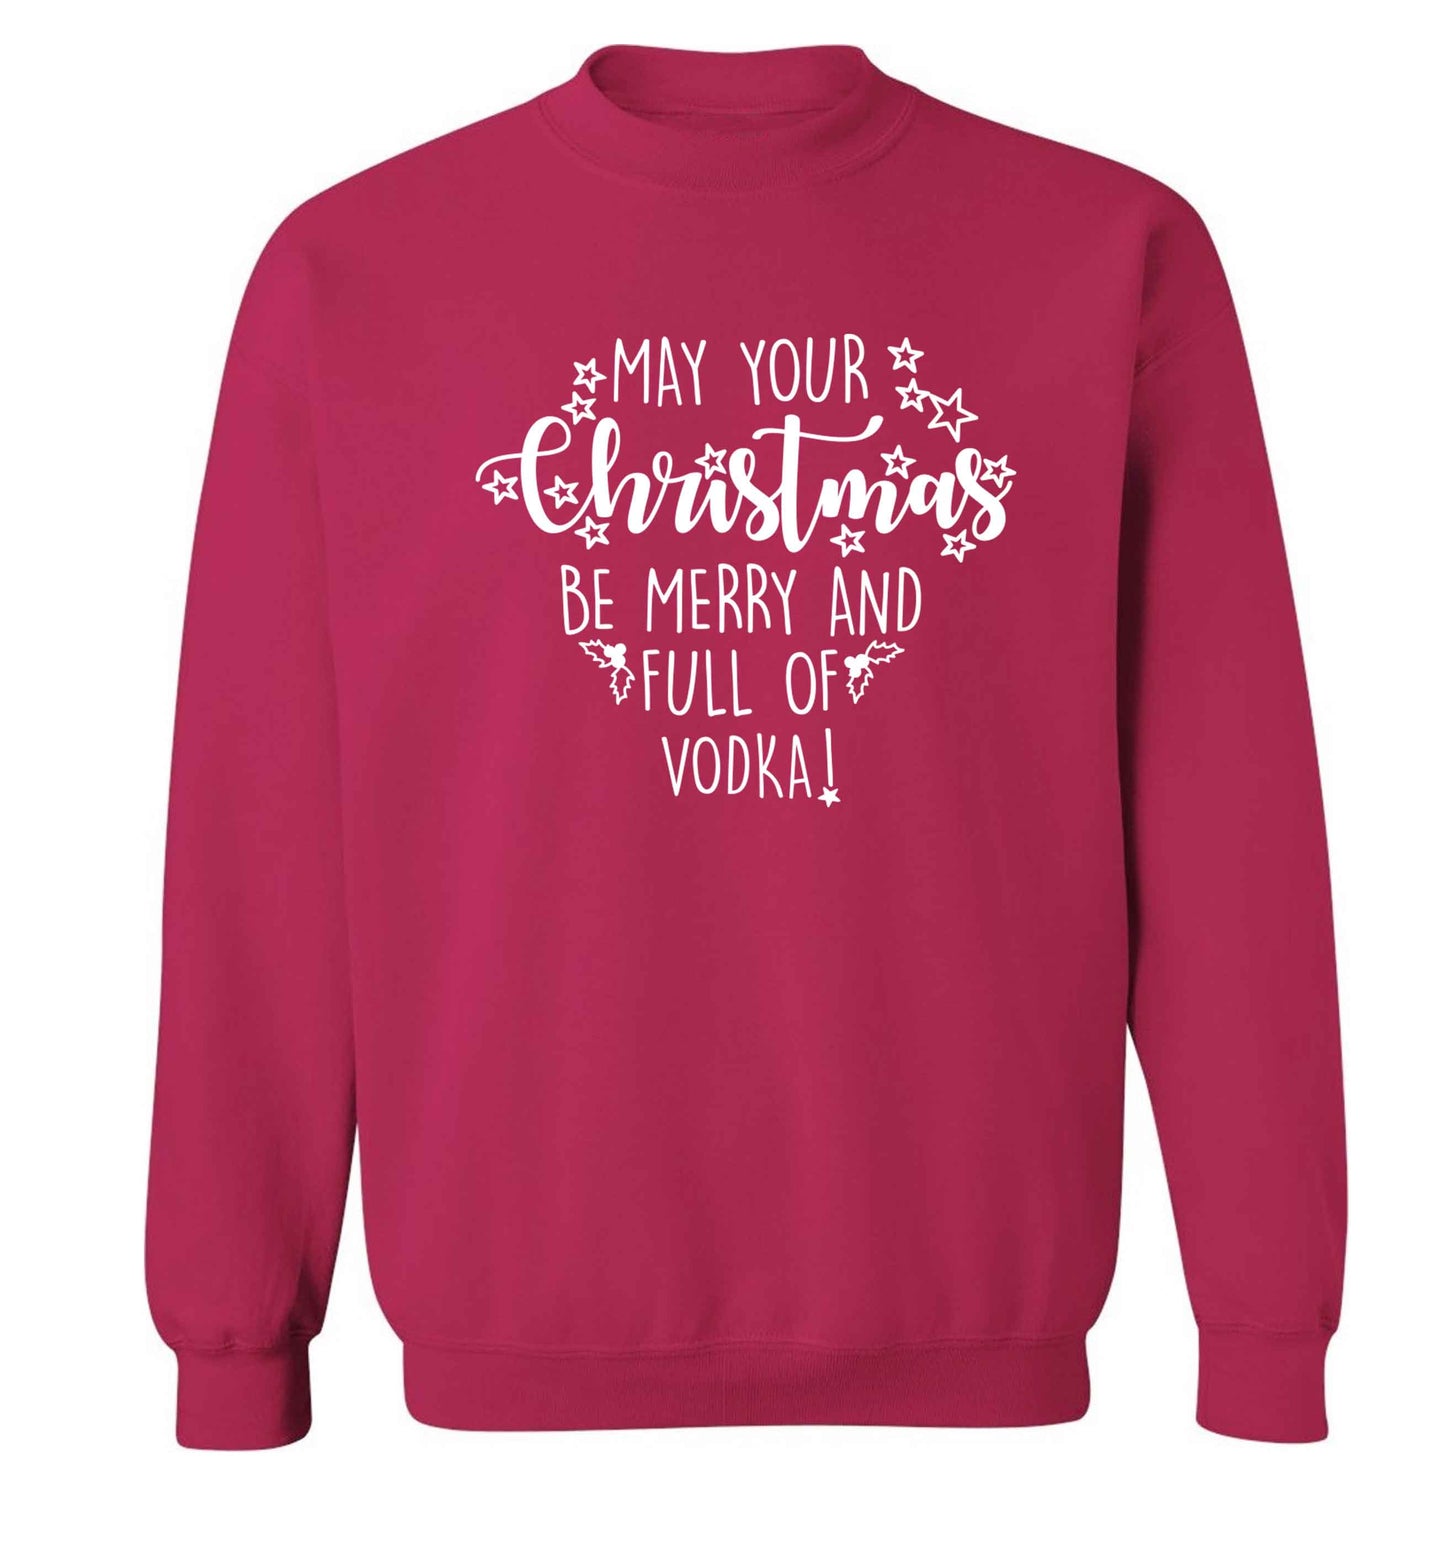 May your Christmas be merry and full of vodka Adult's unisex pink Sweater 2XL